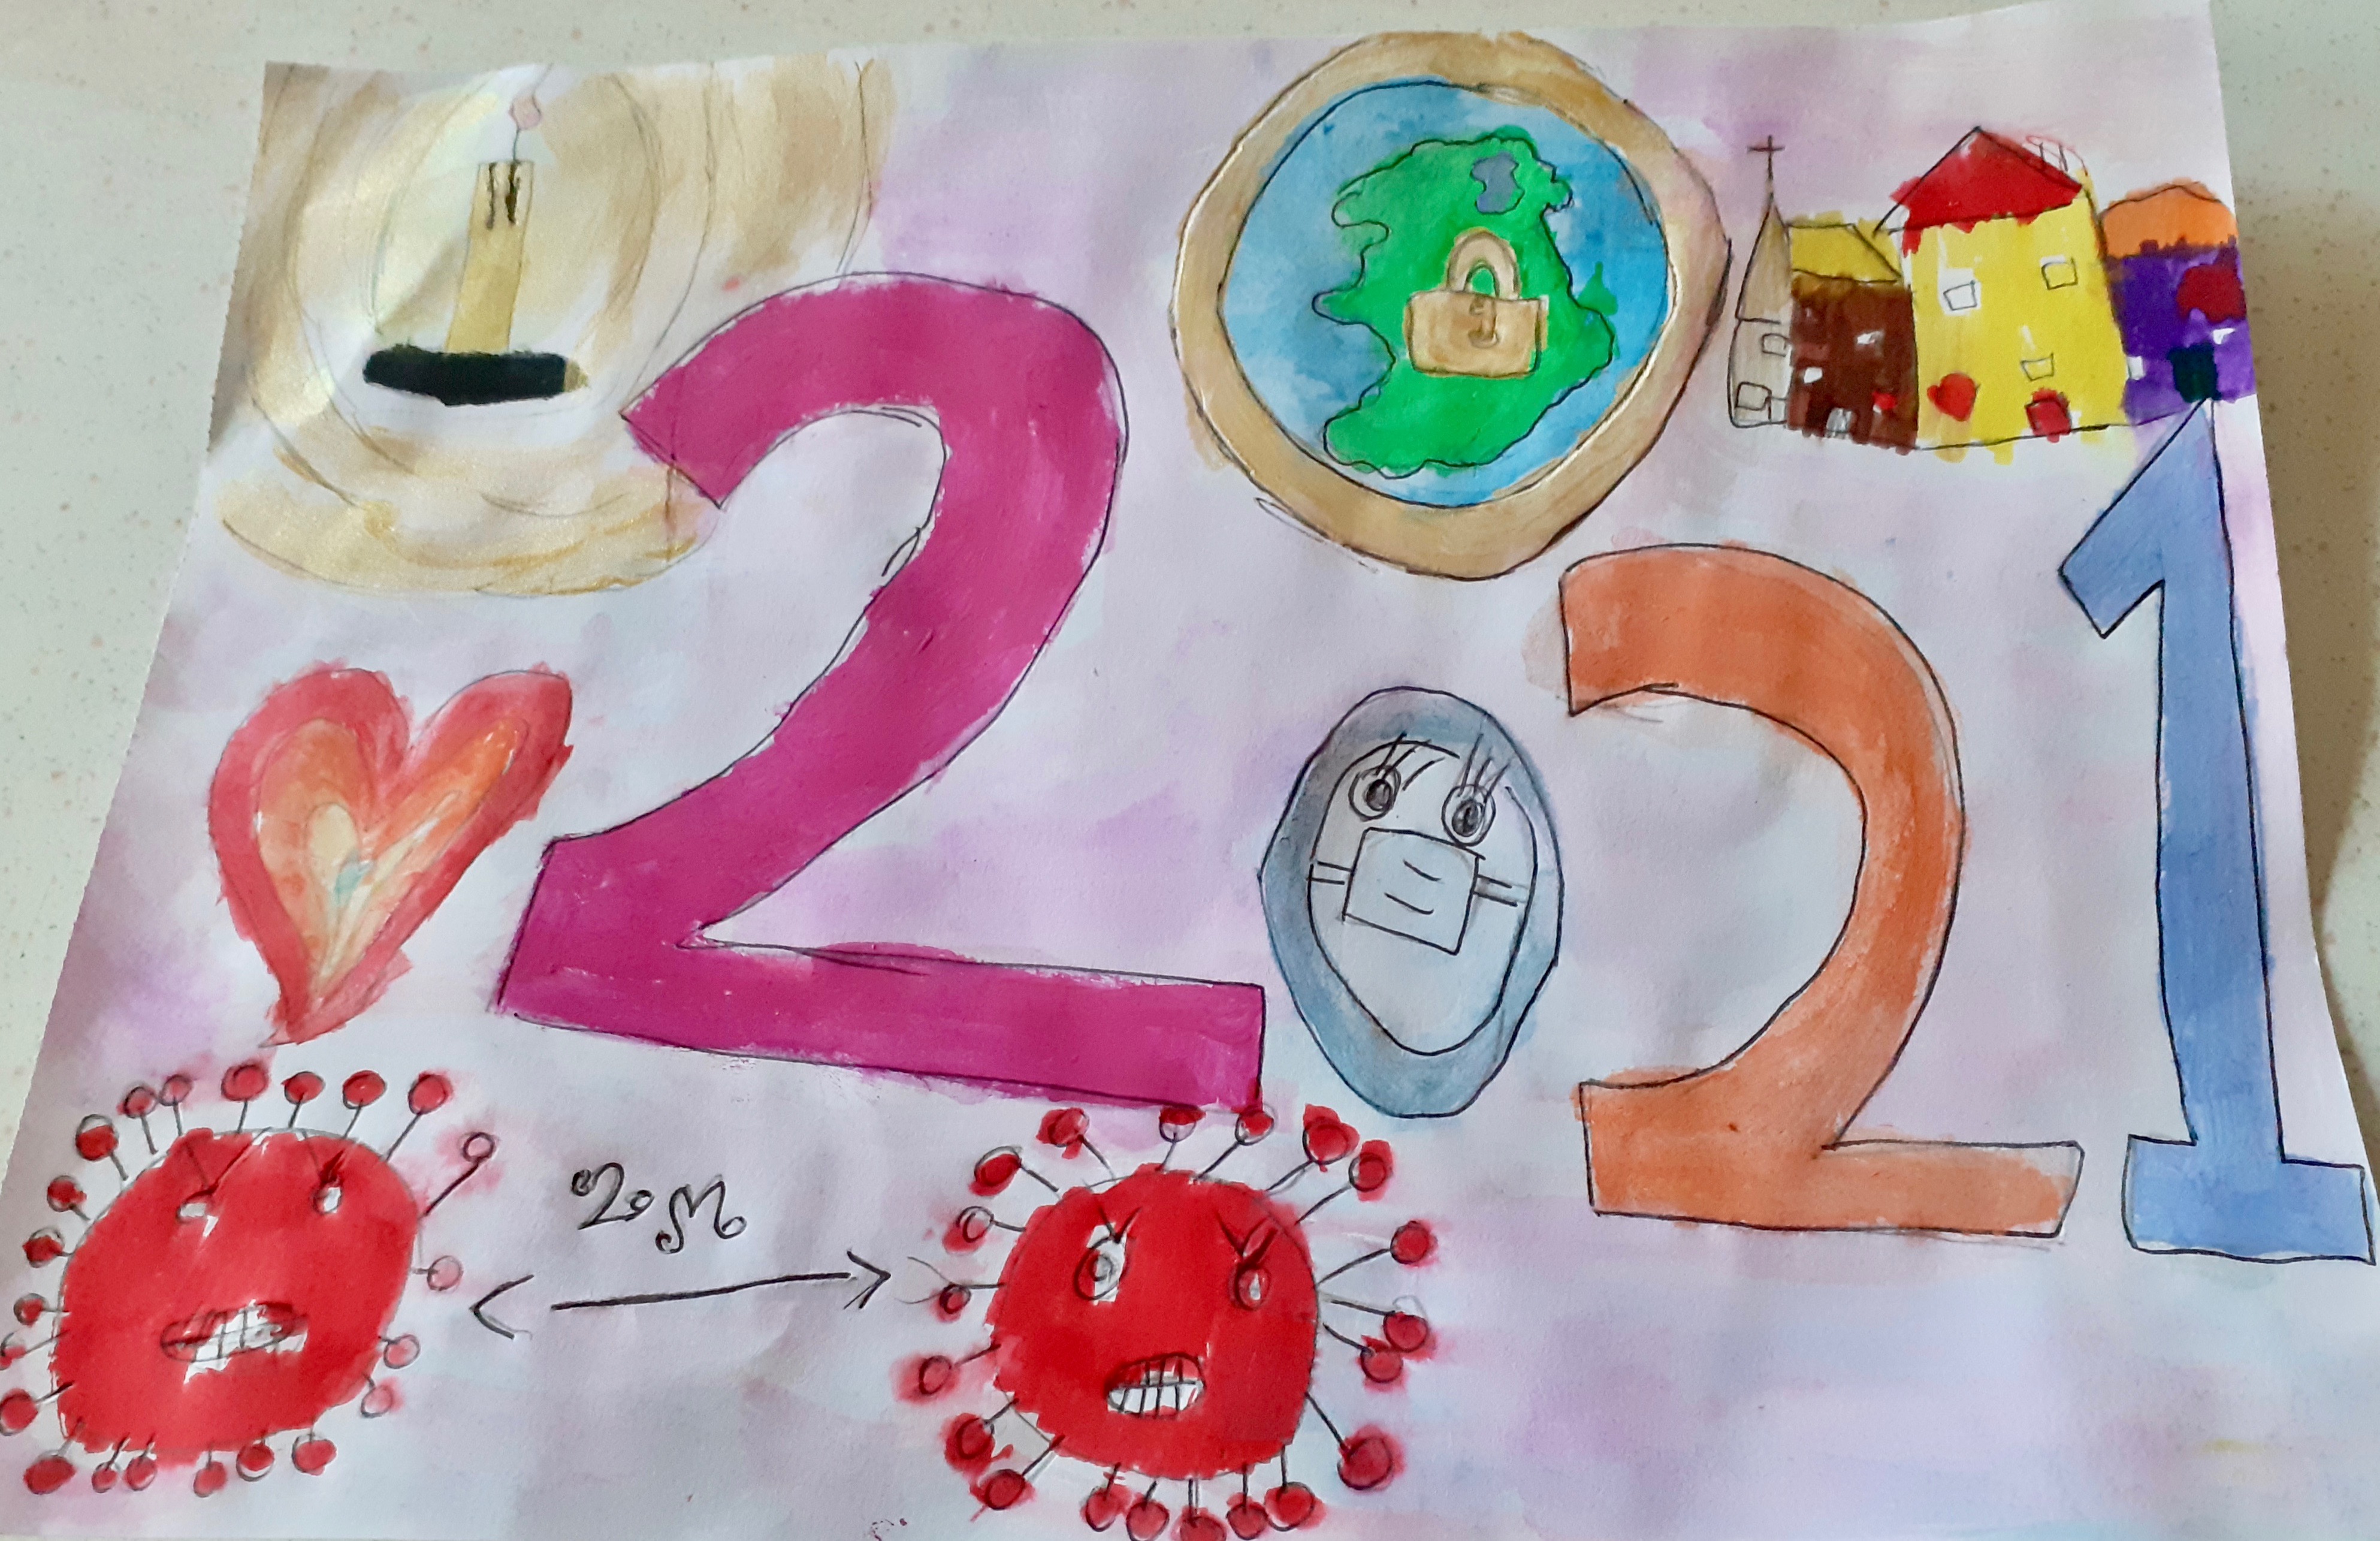 '2021 Ireland's Hope' by Grace Brigid (6) from Armagh